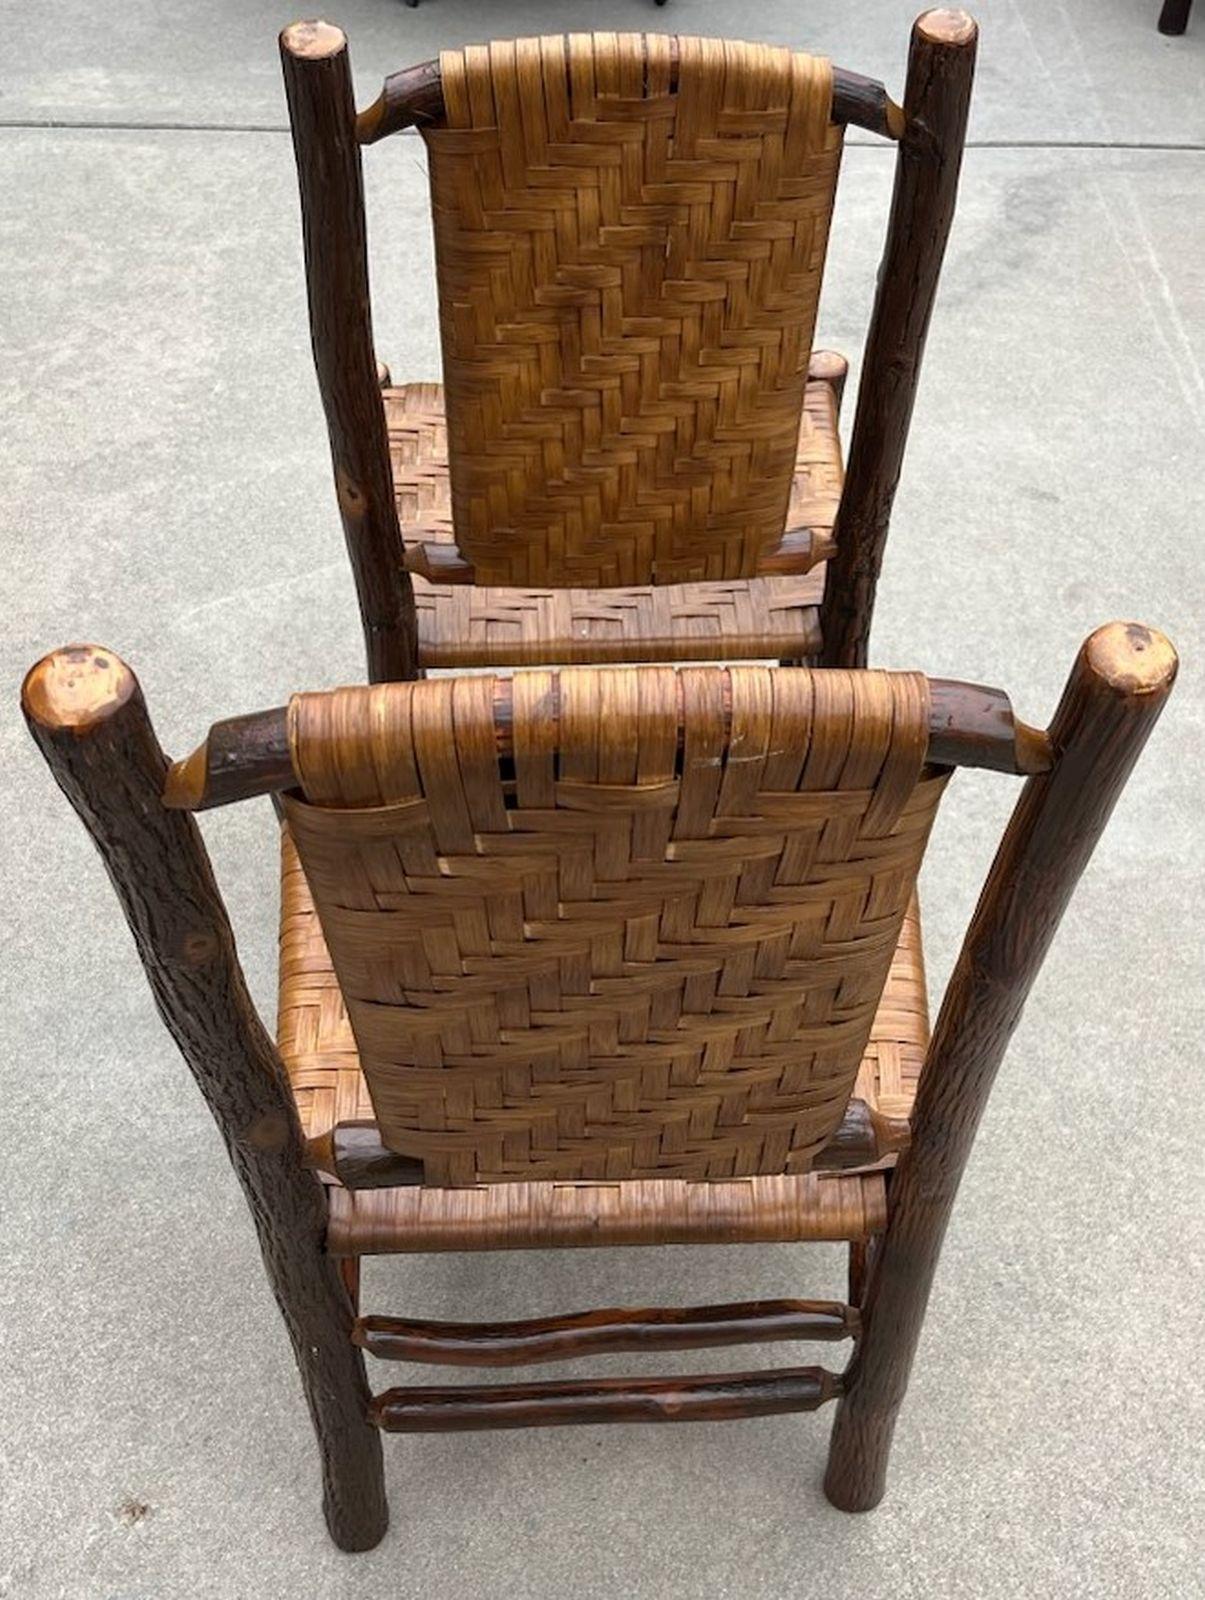 Hickory Pair of Old hickory Chairs w/ Original Woven Back and Seat